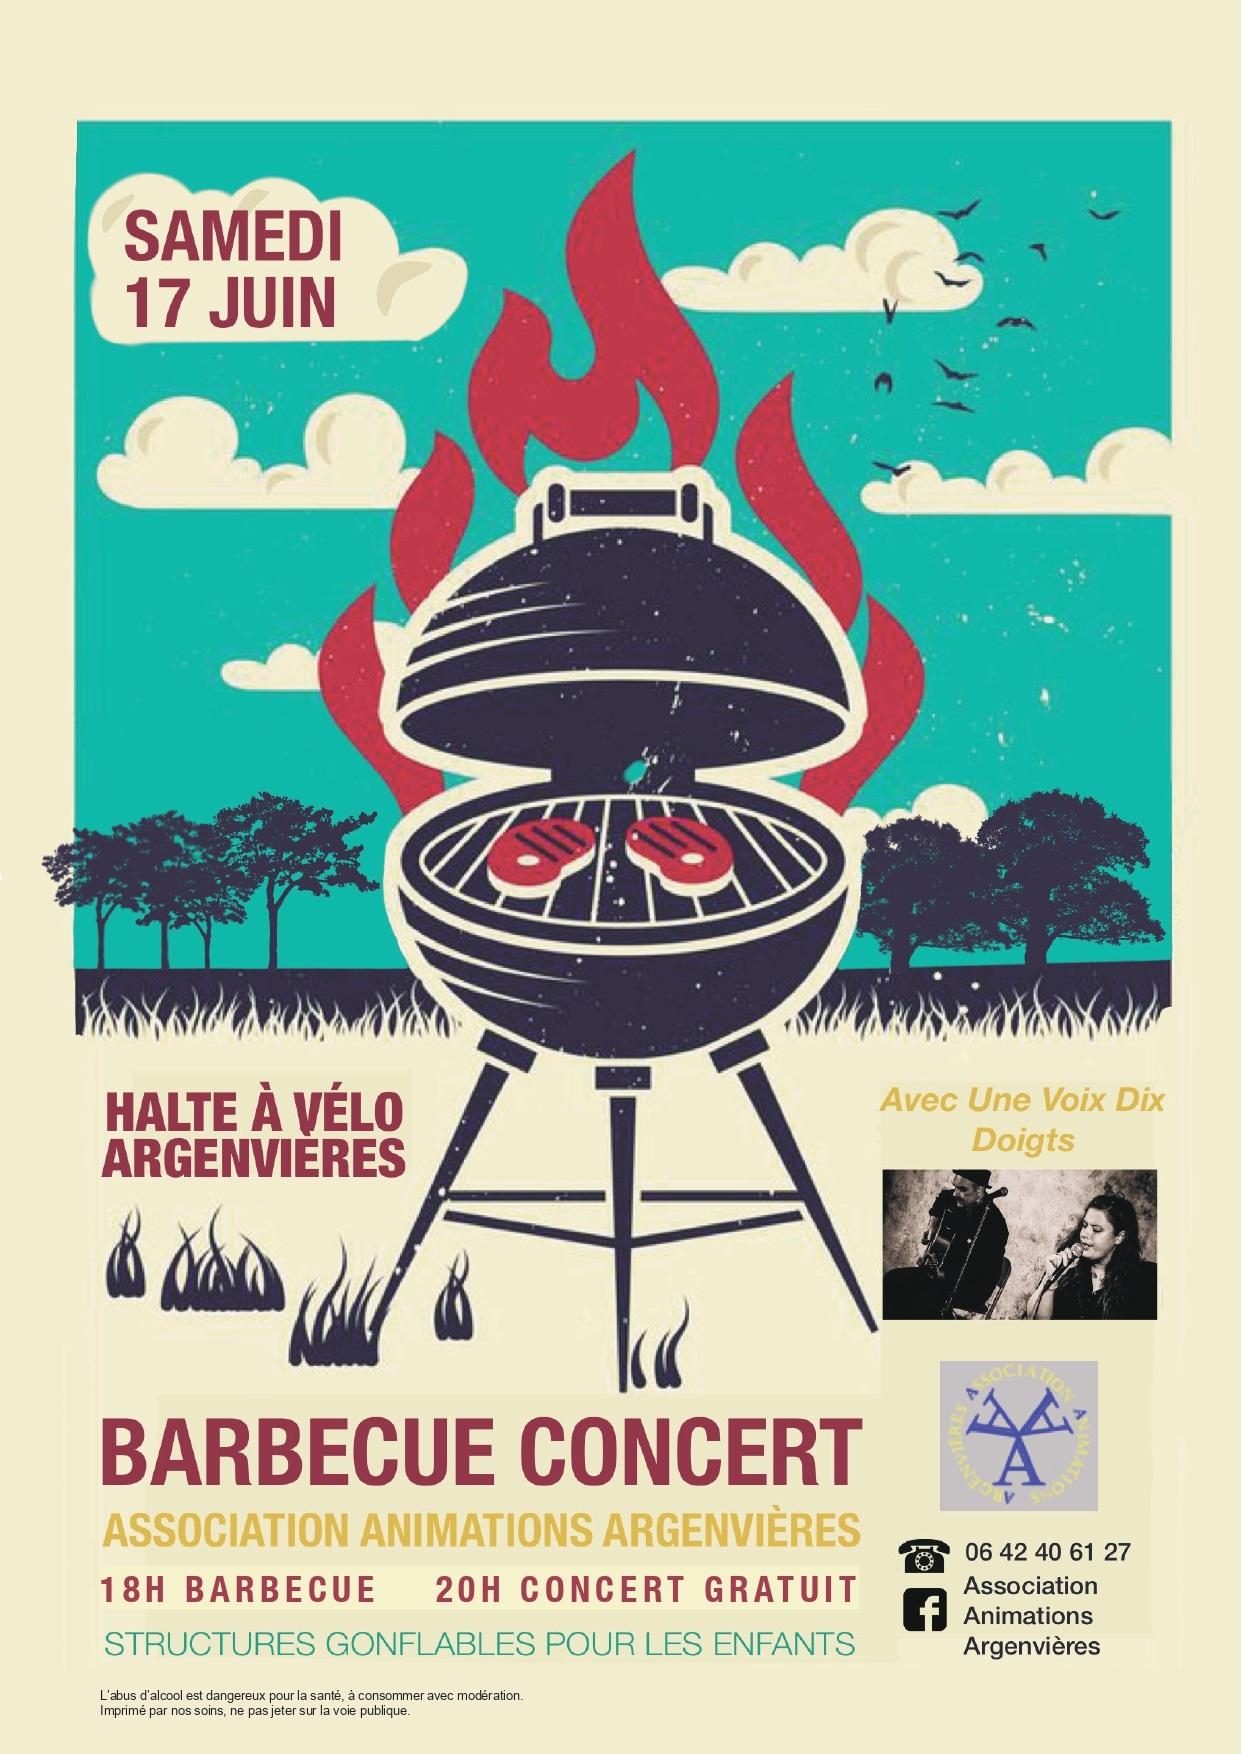 Barbecue concert